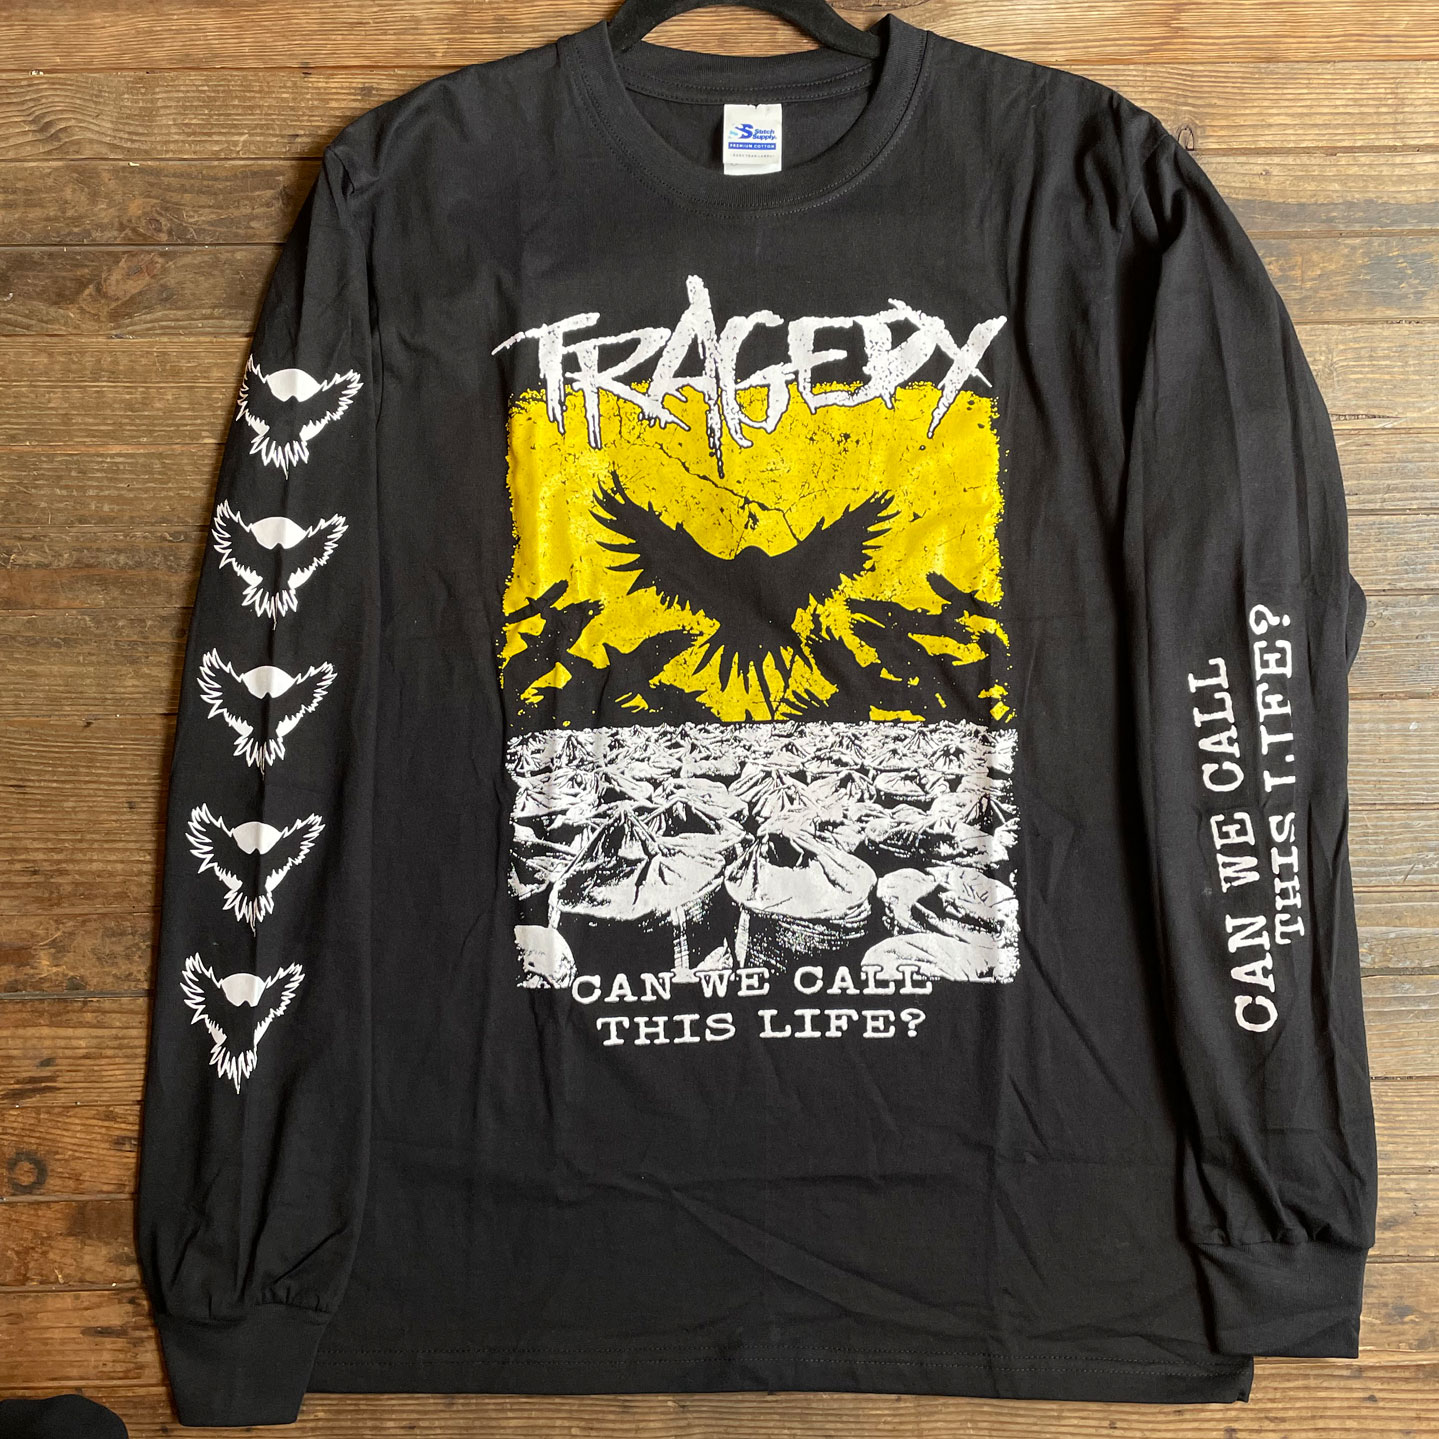 TRAGEDY ロングスリーブTシャツ CAN WE CALL THIS LIFE？